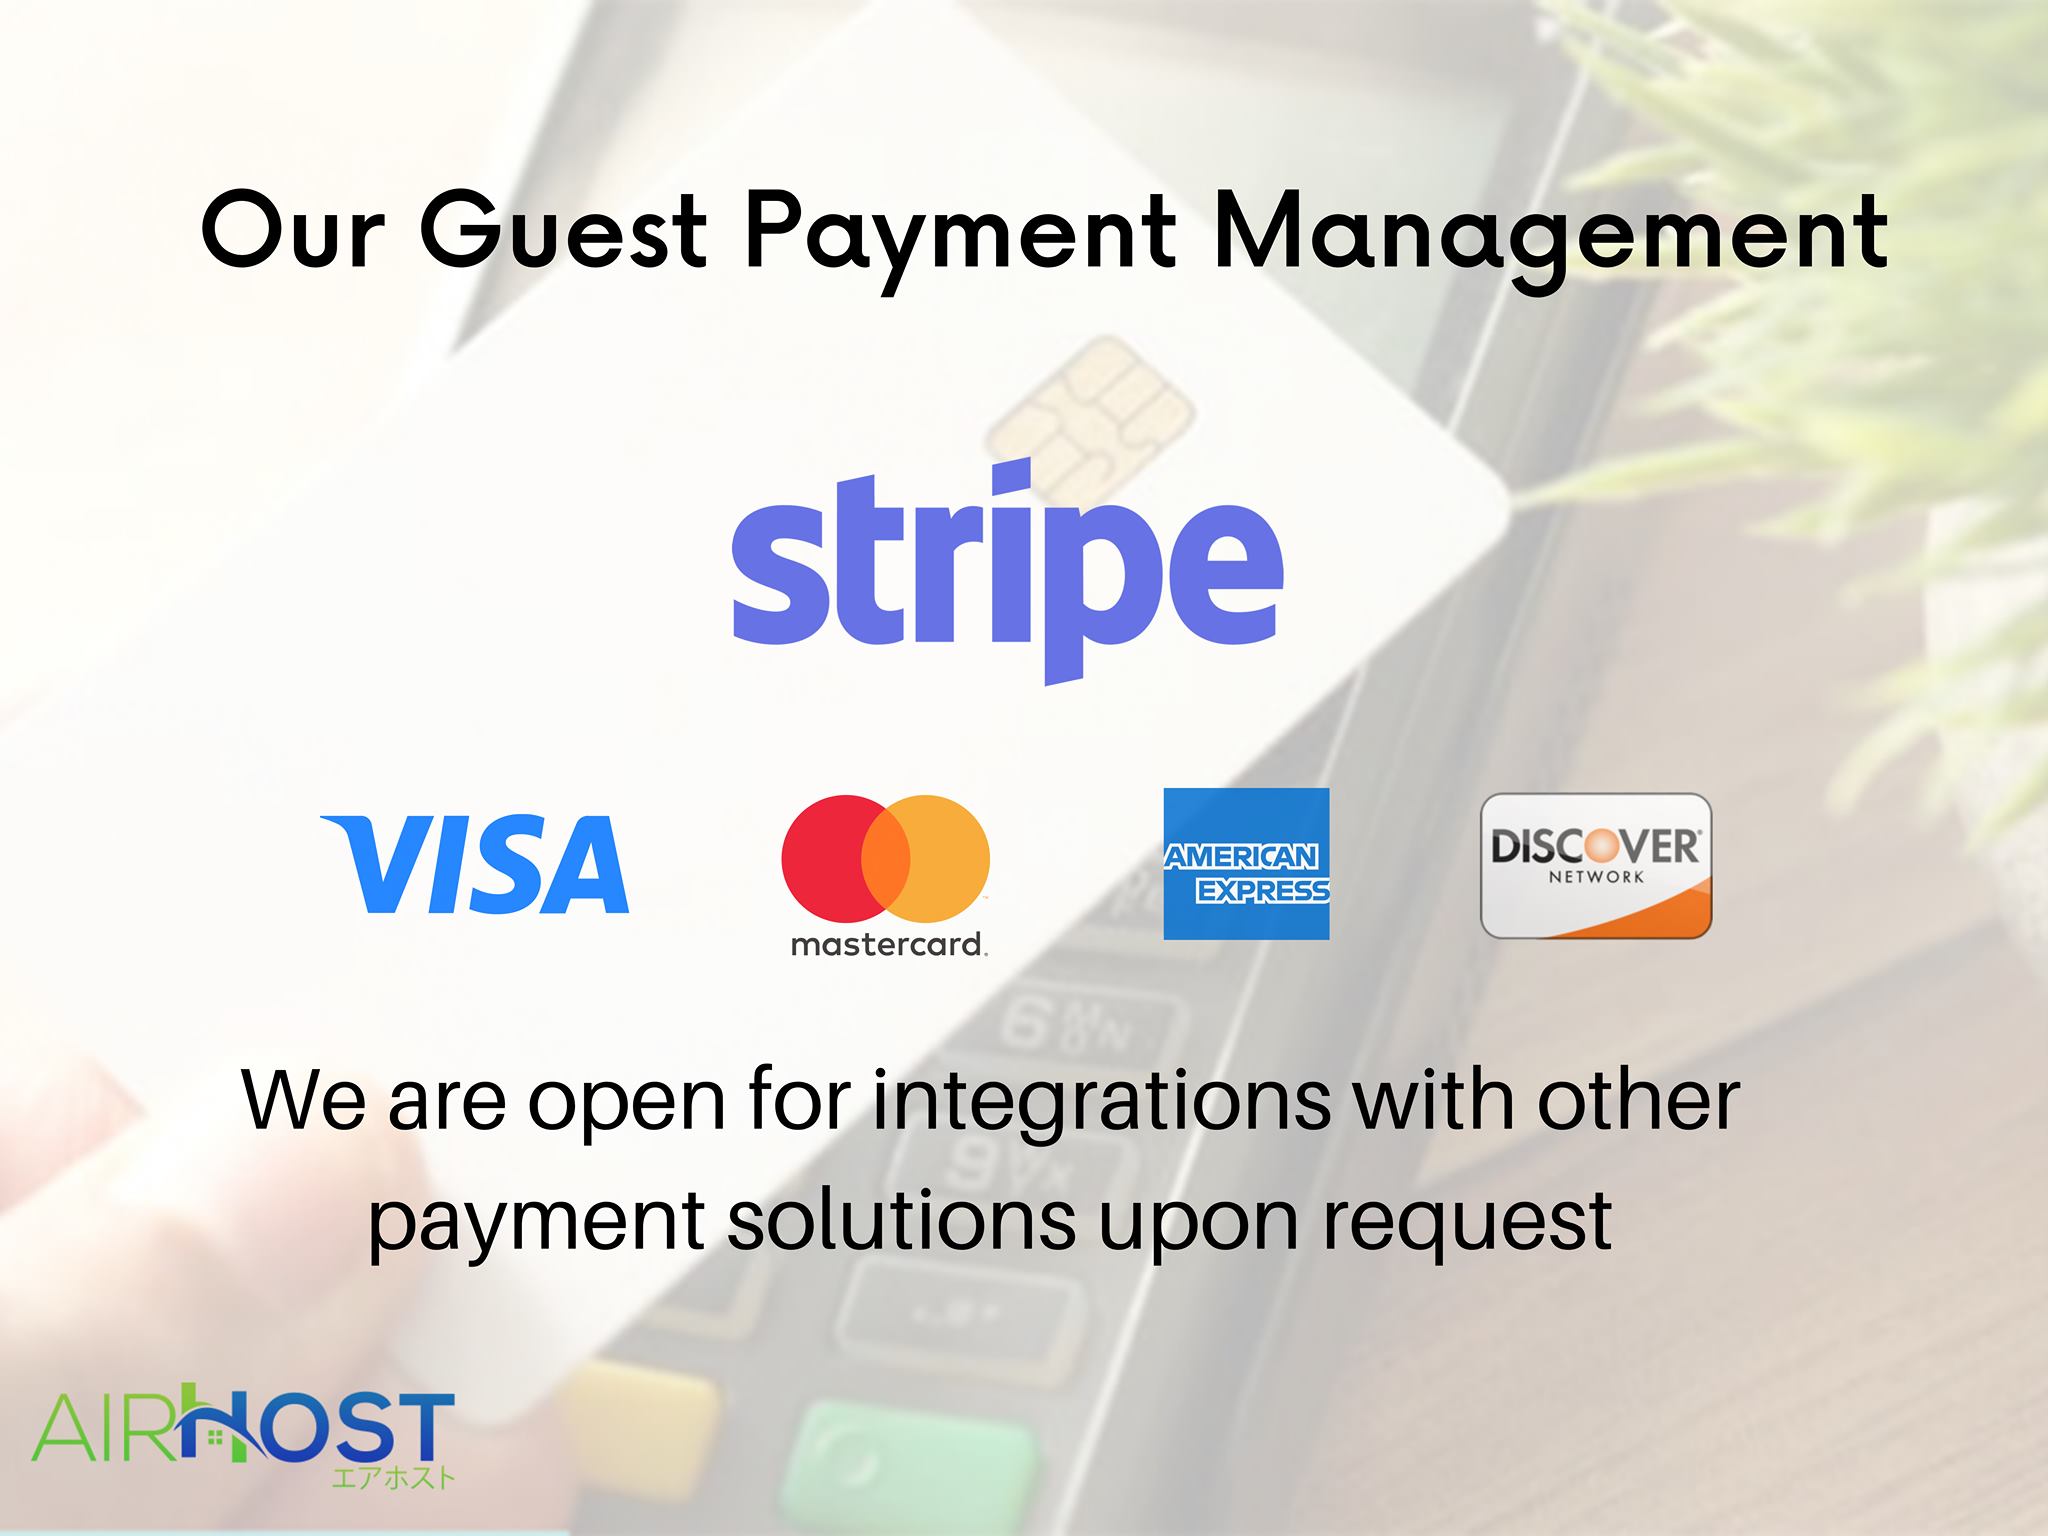 AirHost's Payment Processing Solution